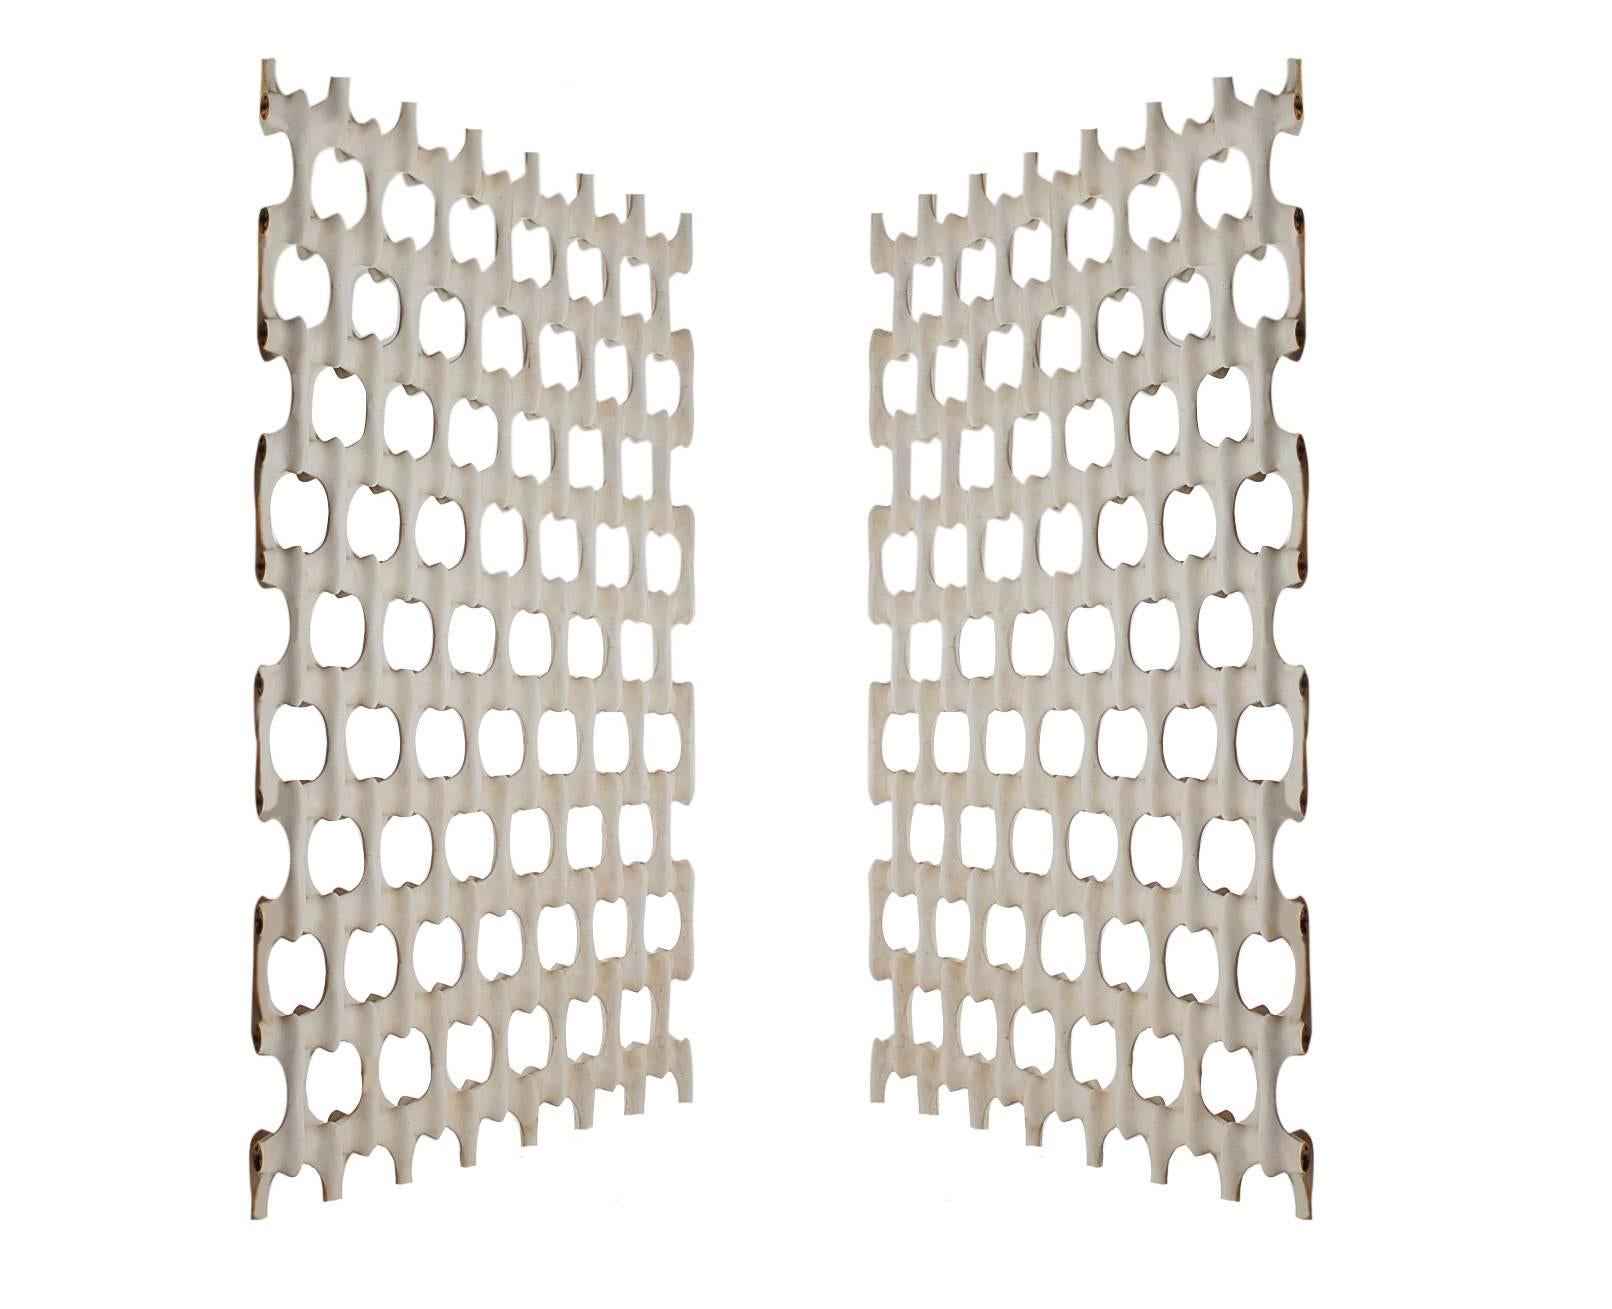 Mid-20th Century Pair of Mid-Century Modern Room Divider Screens by Richard Harvey after Panton